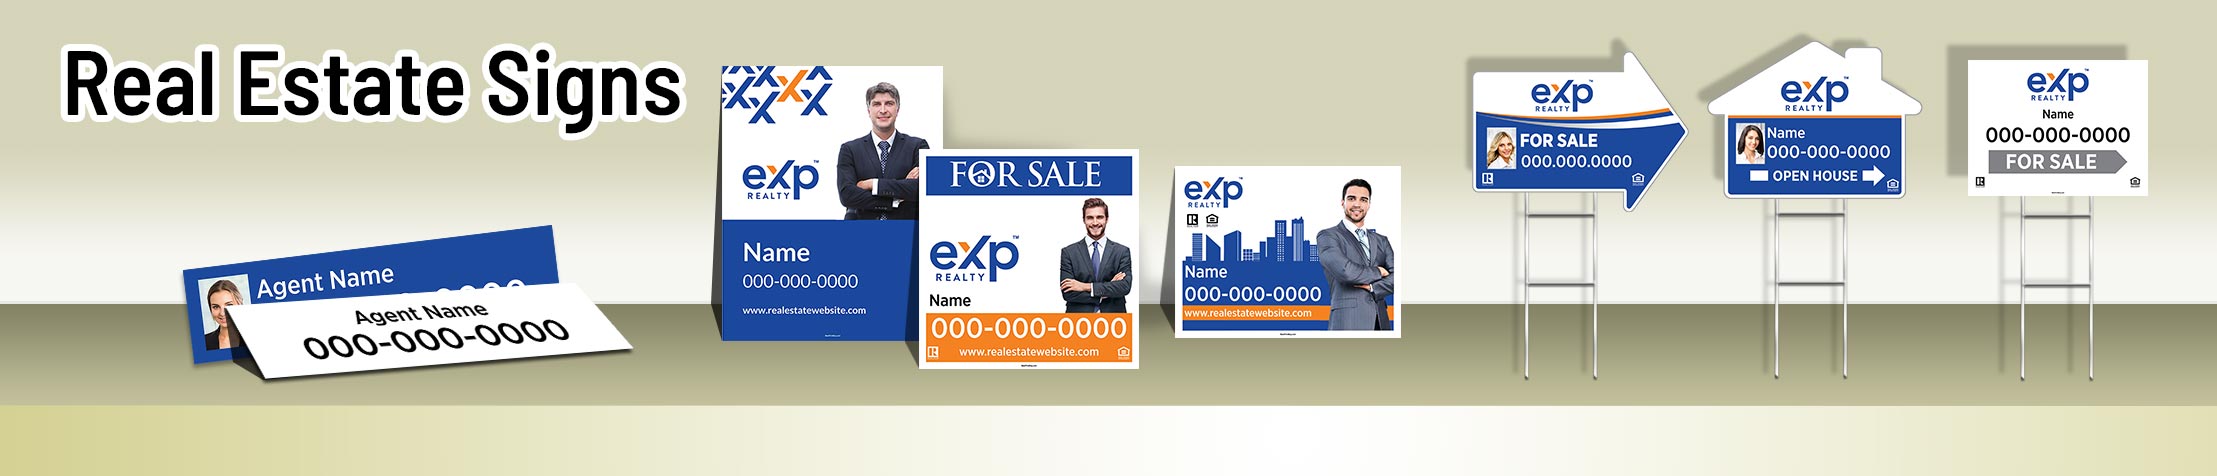 eXp Realty Real Estate Signs -  real estate signs - H-Frame Units, Directional Signs, A-Frame Units, Yard Post and Panel | Sparkprint.com